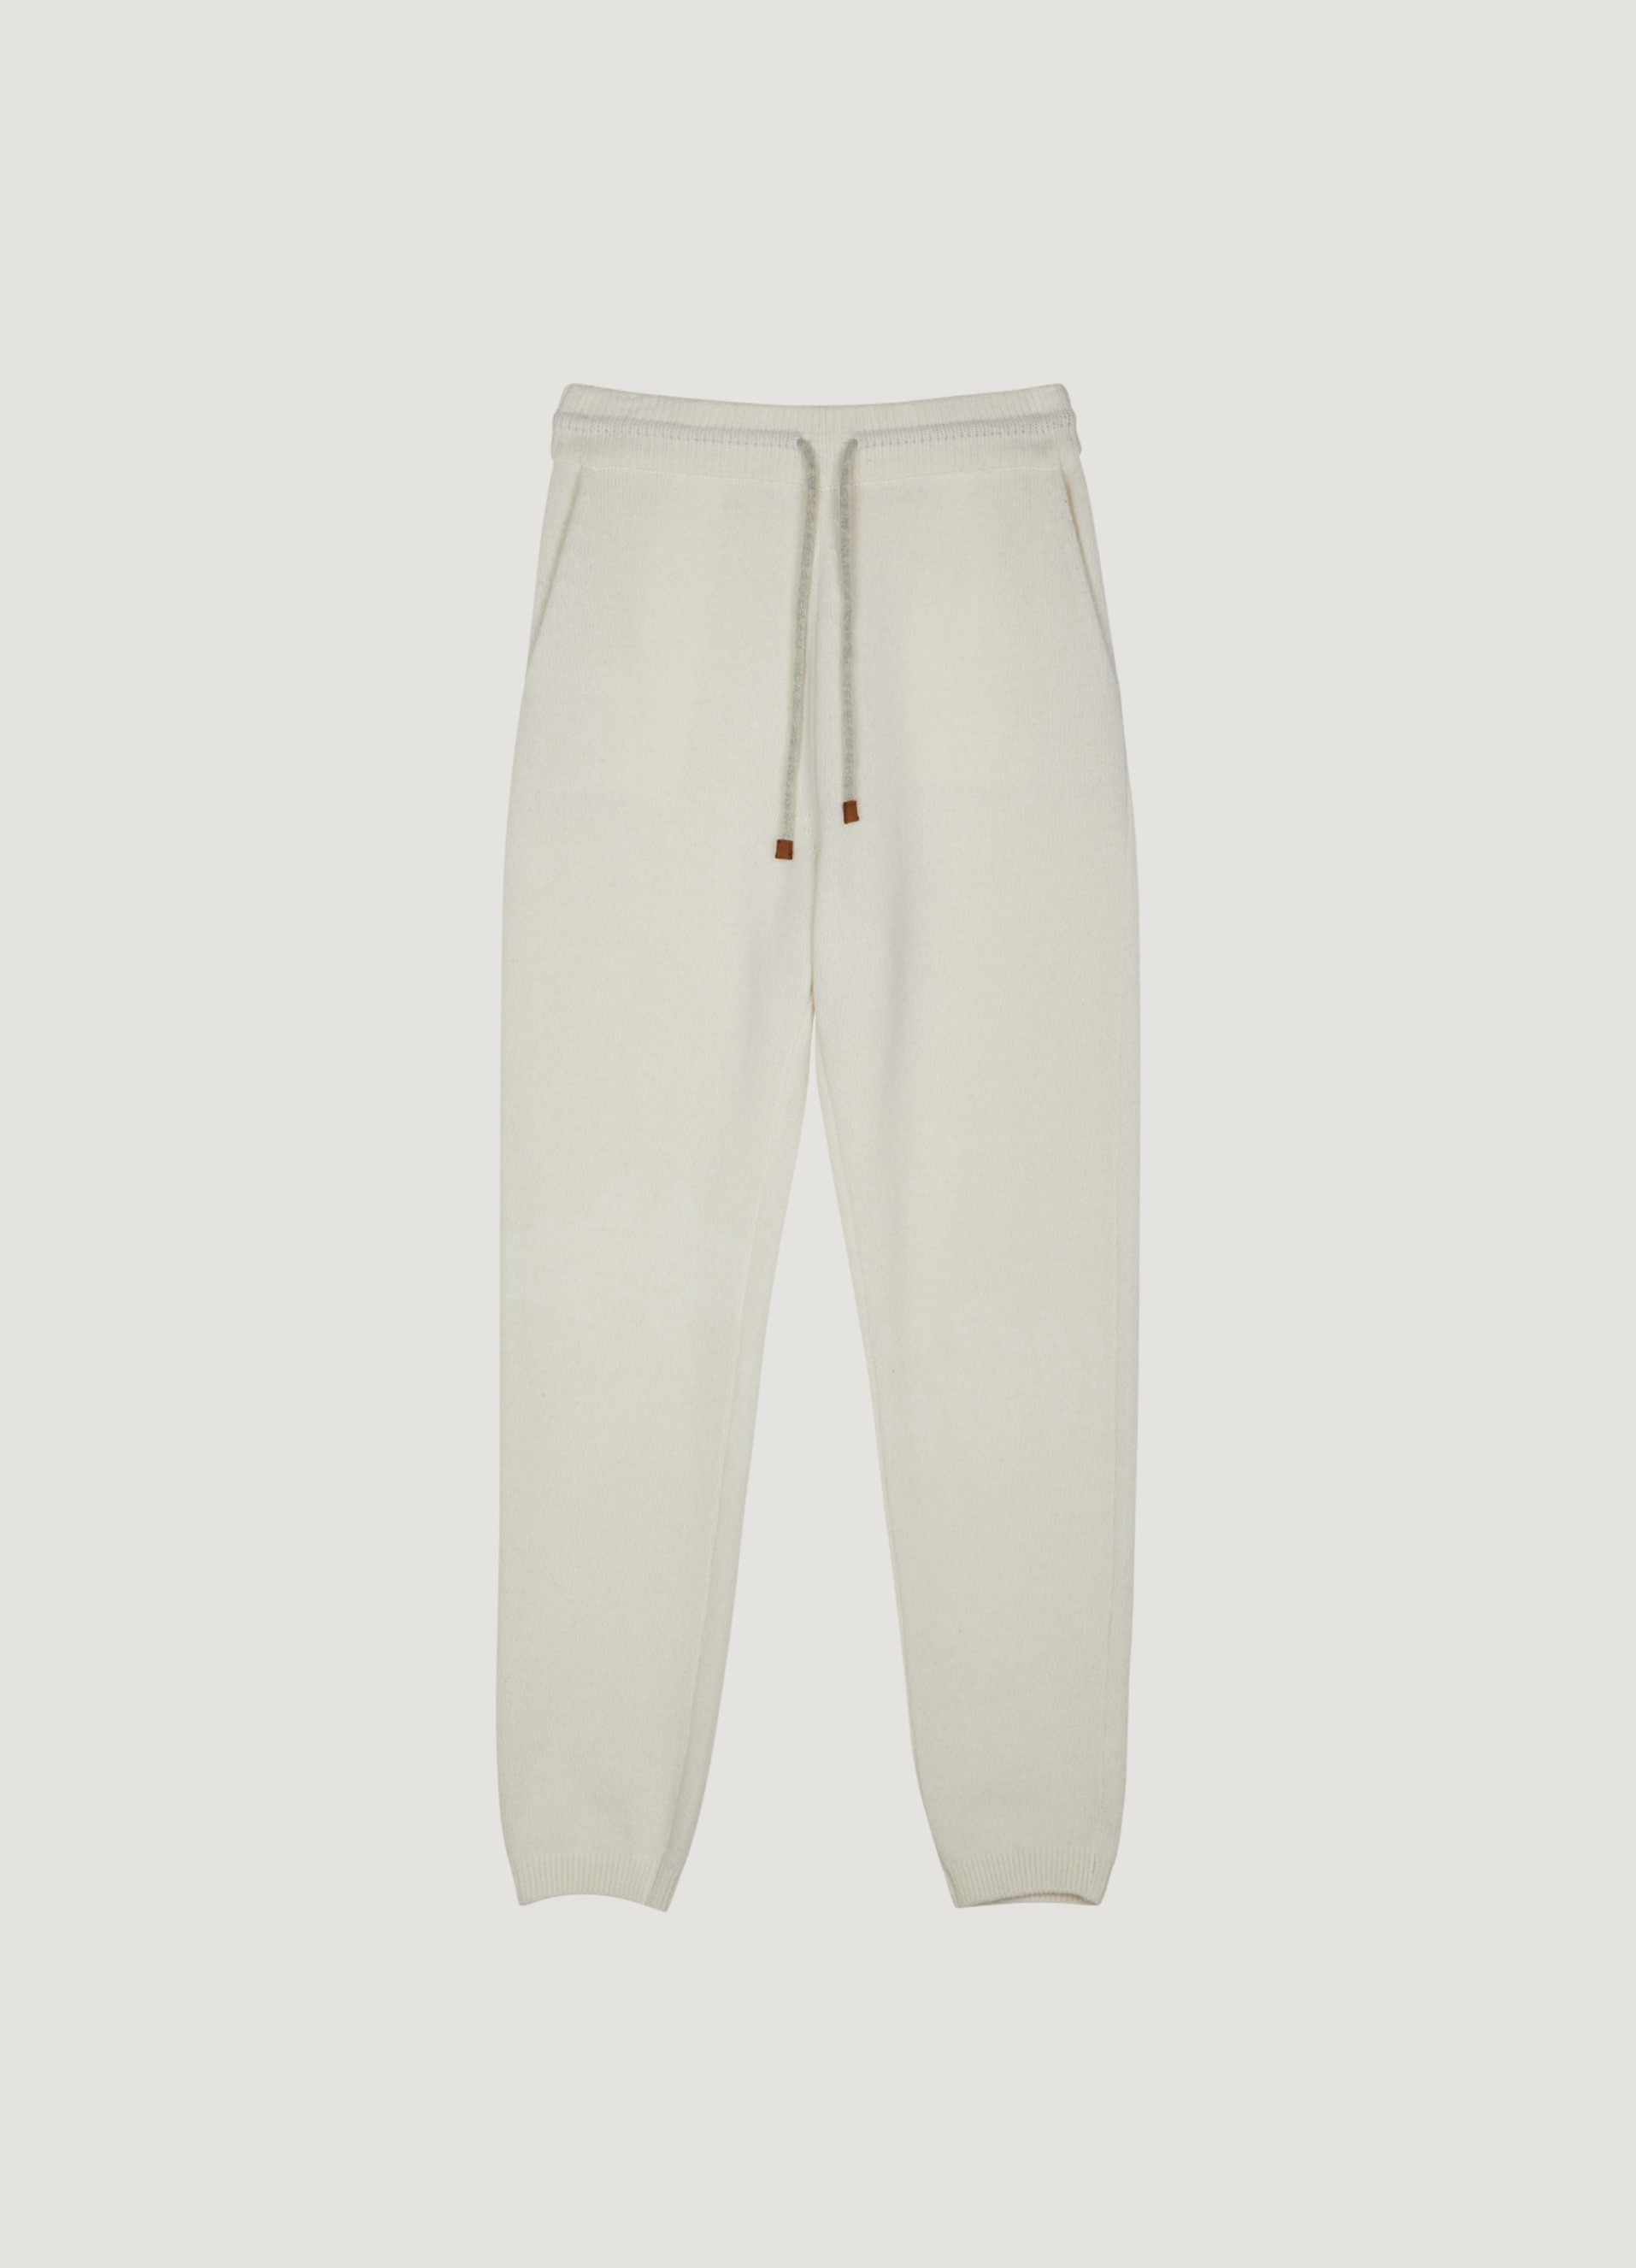 Cashmere Blend Knit Pants (Ivory) Out of Stock